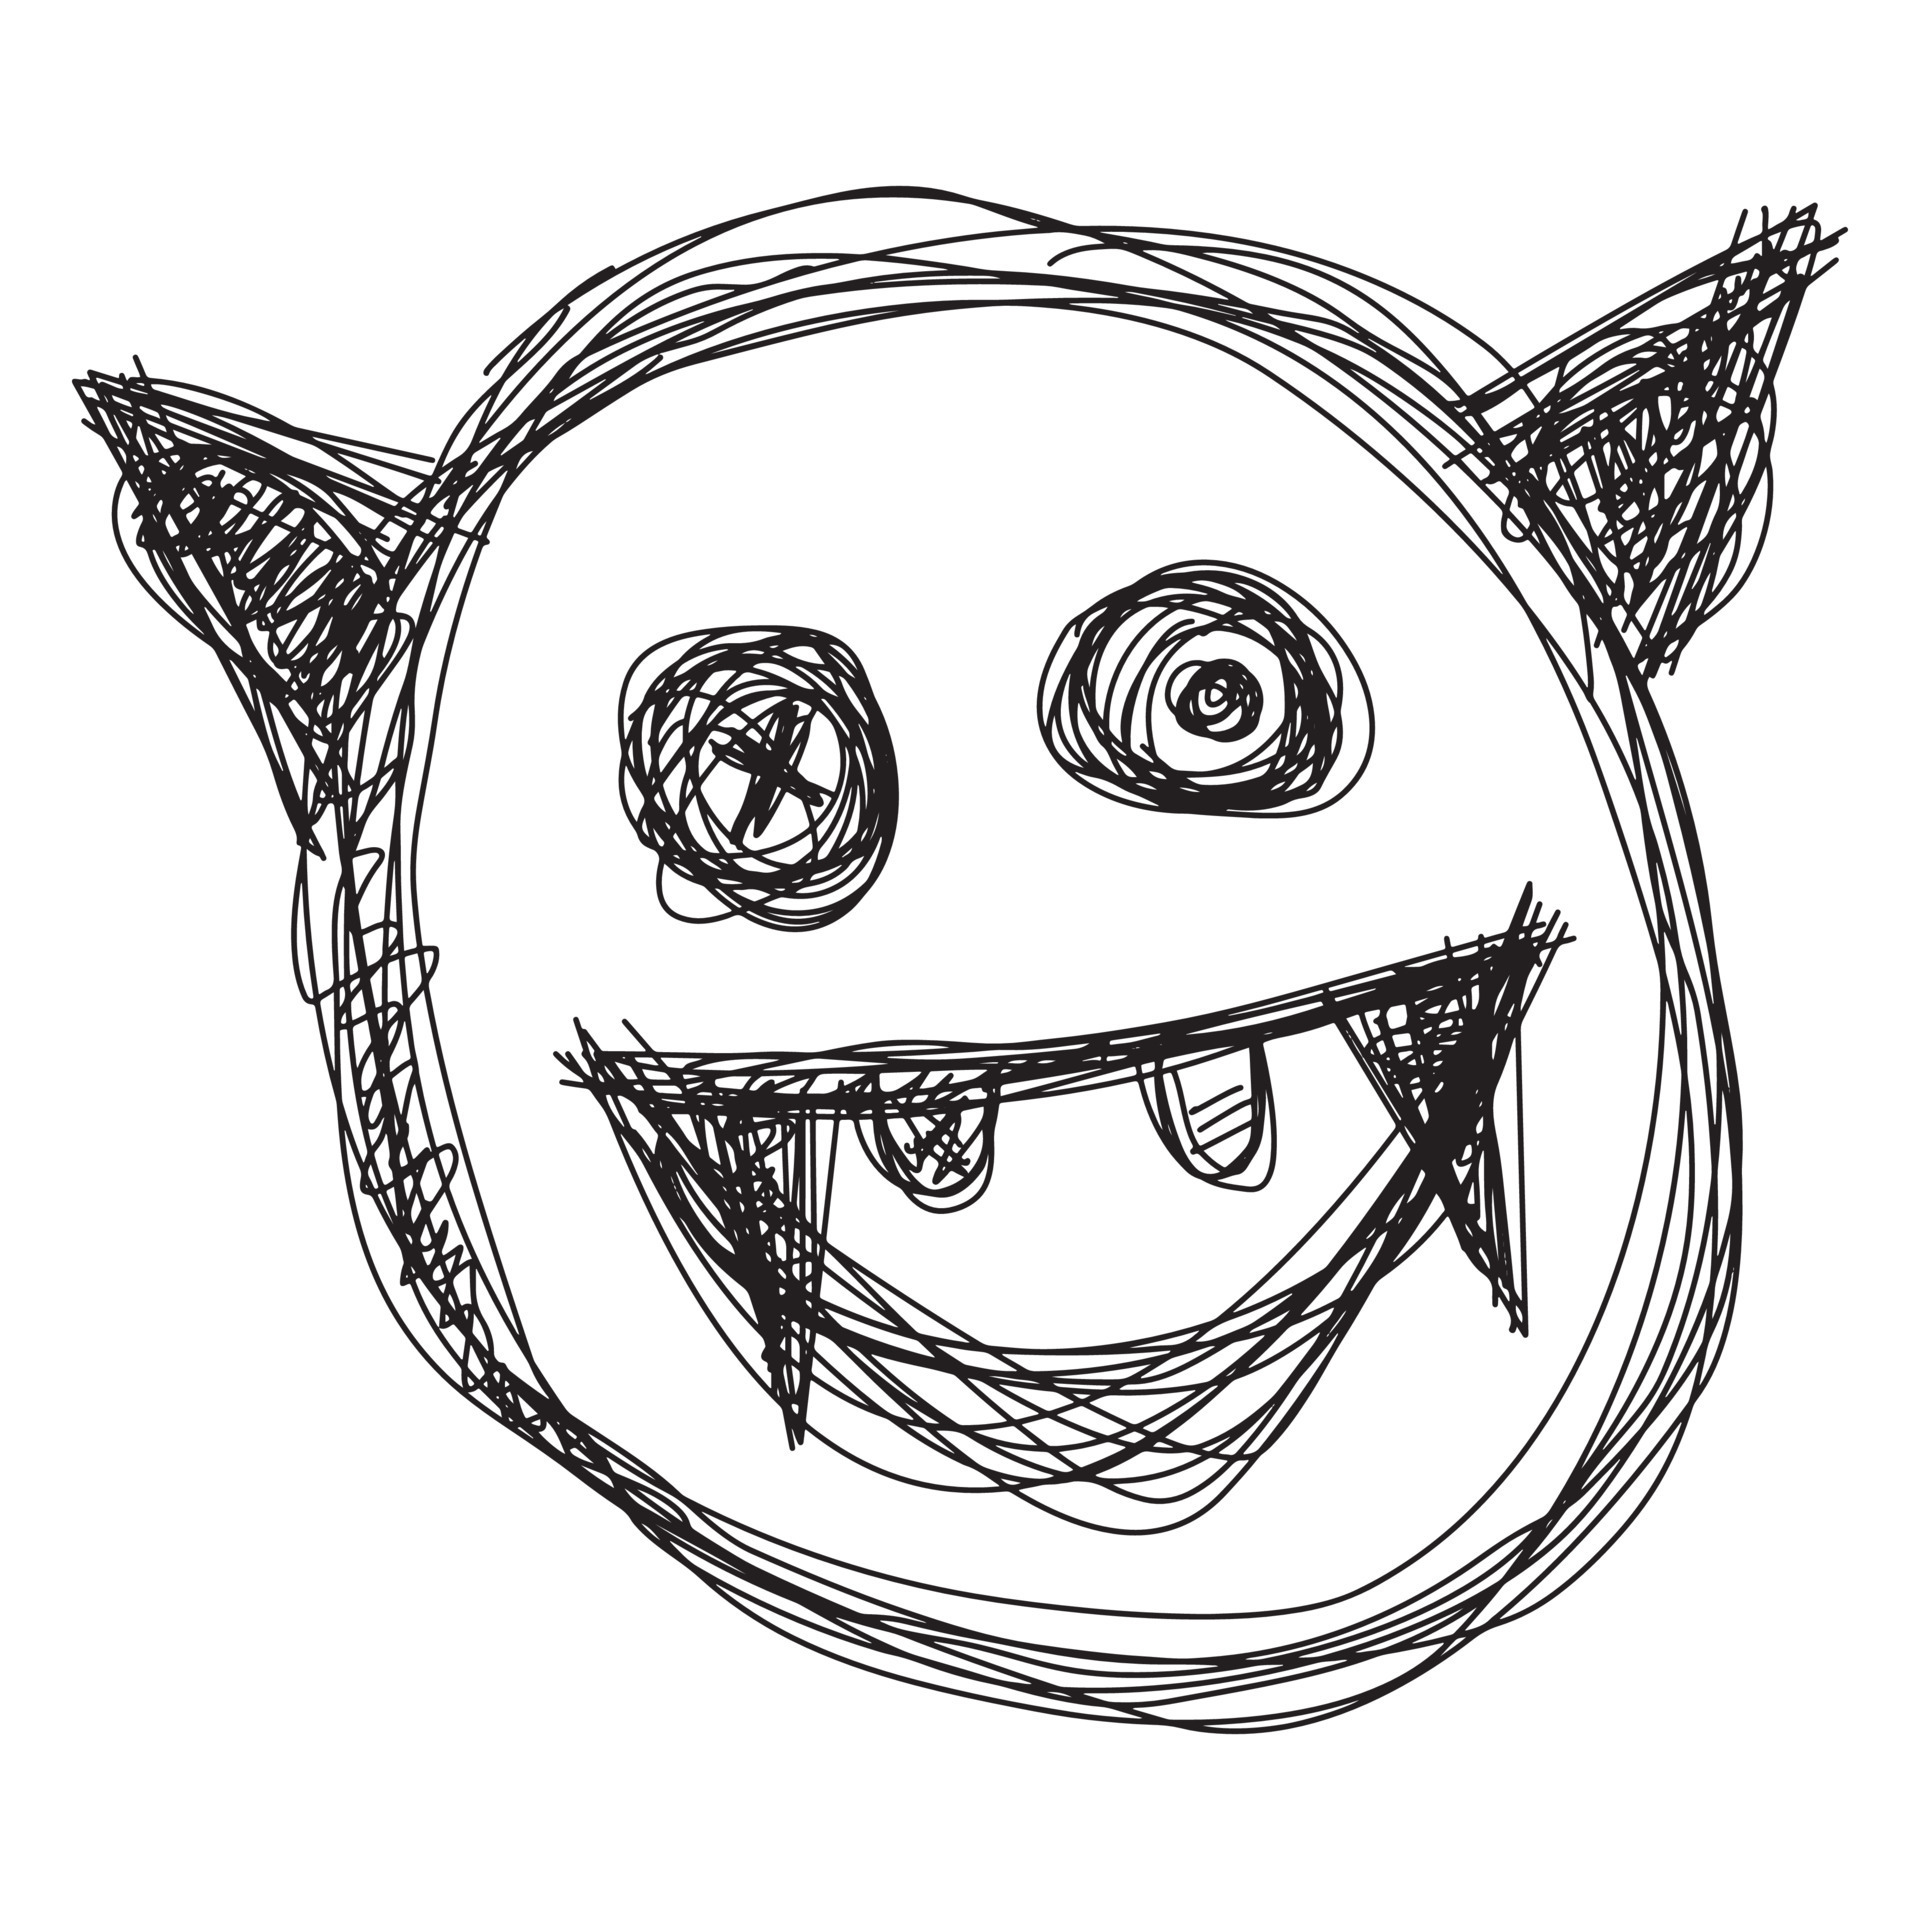 scratchy ink drawing of a scared face - Stock Image - Everypixel